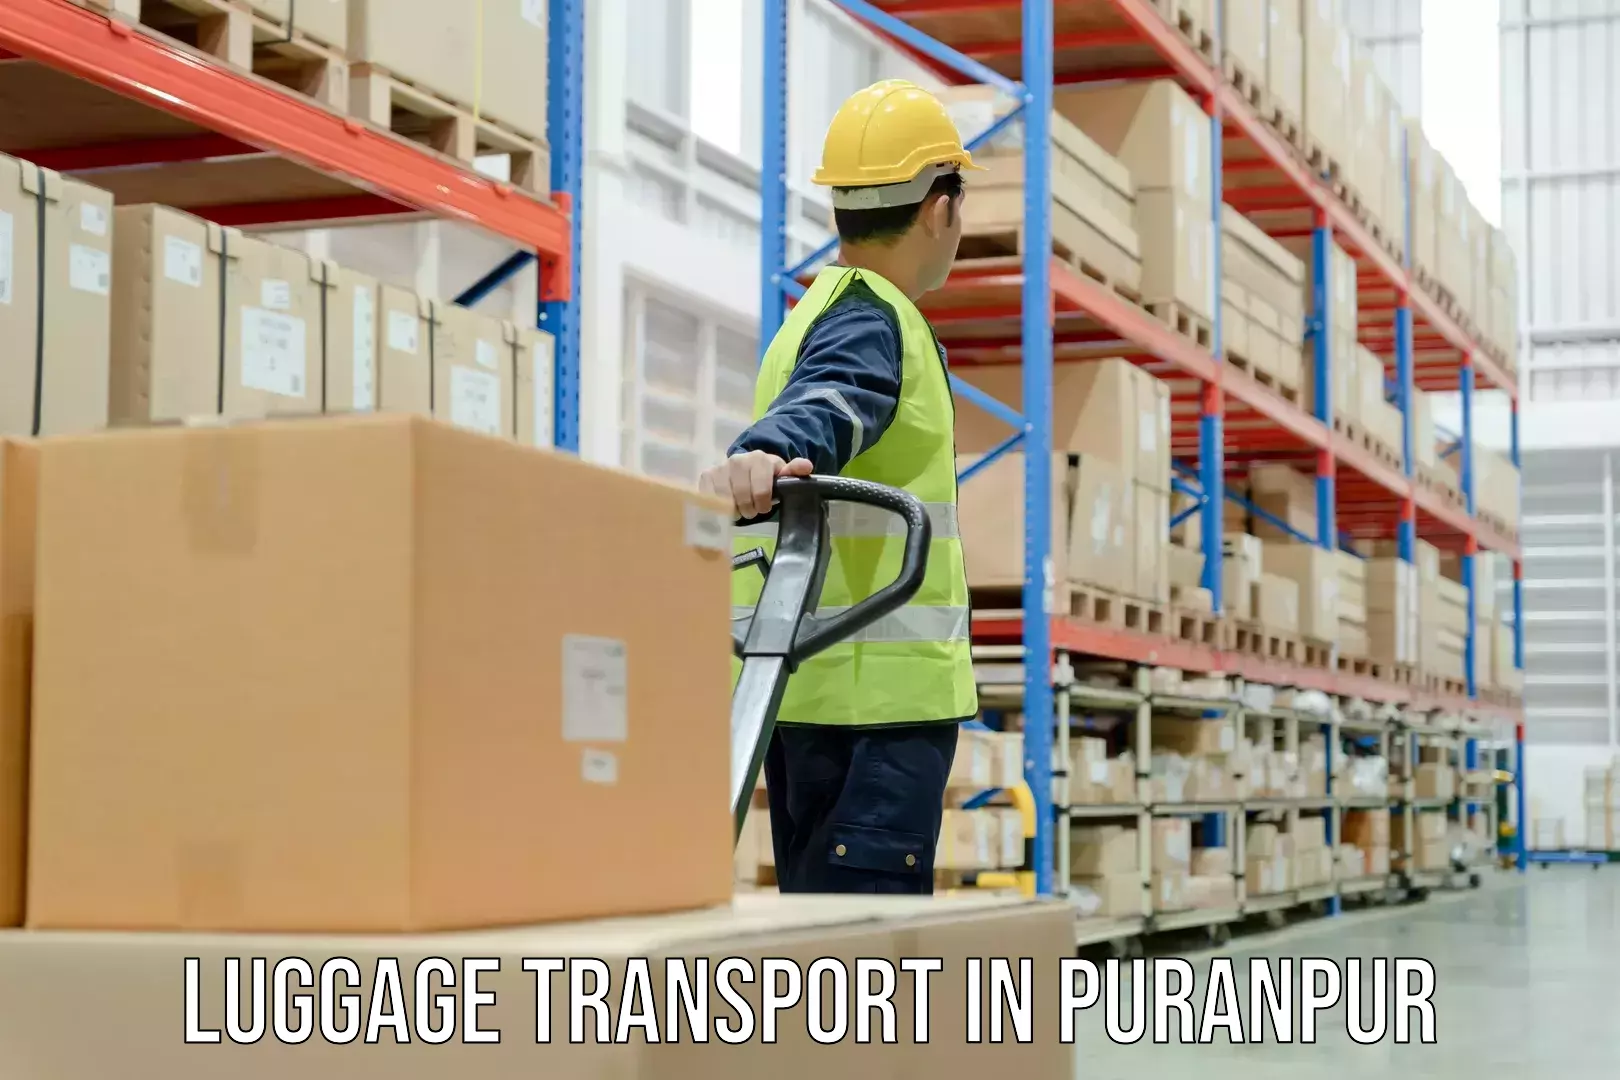 Luggage transport tips in Puranpur